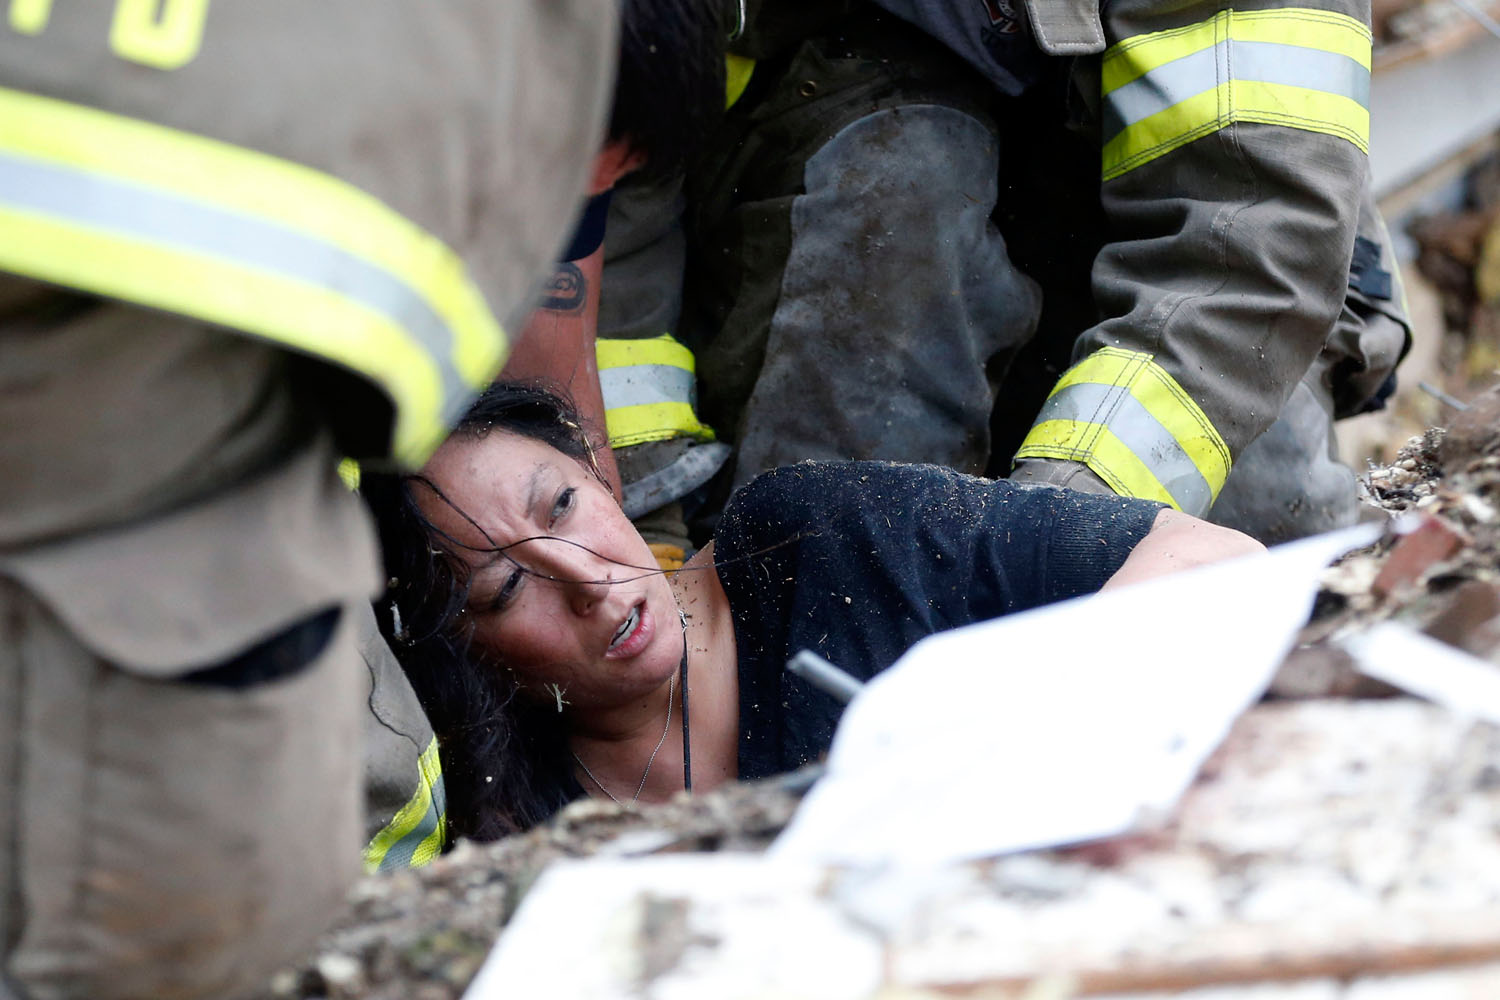 May 20, 2013. A woman is pulled out from under tornado debris at the Plaza Towers School.